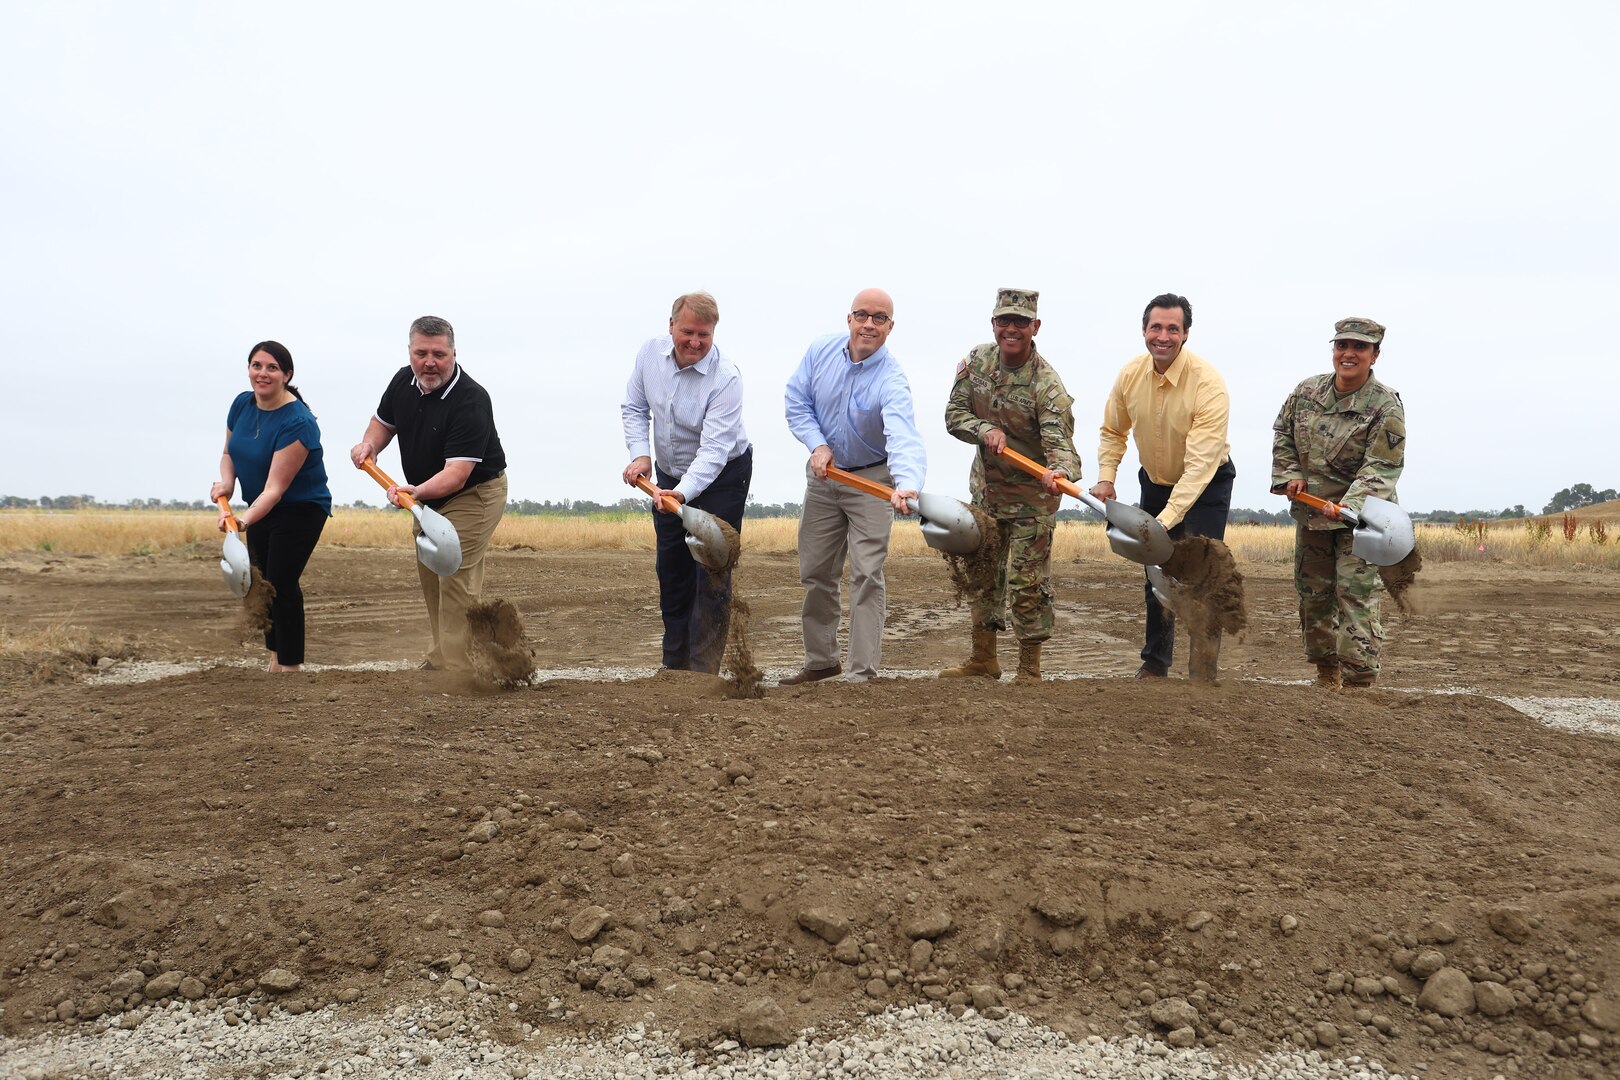 A ceremonial groundbreaking is held May 19, 2022, for an energy resilience project at Joint Forces Training Base in Los Alamitos, California. From left: Stephanie Kline, project director, and Robert Hughes, executive director, both with the U.S. Army Office of Energy Initiatives; Robert Smith, president of Bright Canyon Energy; Paul Farnan, principal deputy, assistant Secretary of the Army for installations, energy and environment; U.S. Army Command Sgt. Maj. Refugio Rosas, from the 40th Infantry Division, California Army National Guard; Anthony Marasa, project manager with Bright Canyon Energy; and Lt. Col. Manju Vig, garrison commander of Joint Forces Training Base, Los Alamitos.